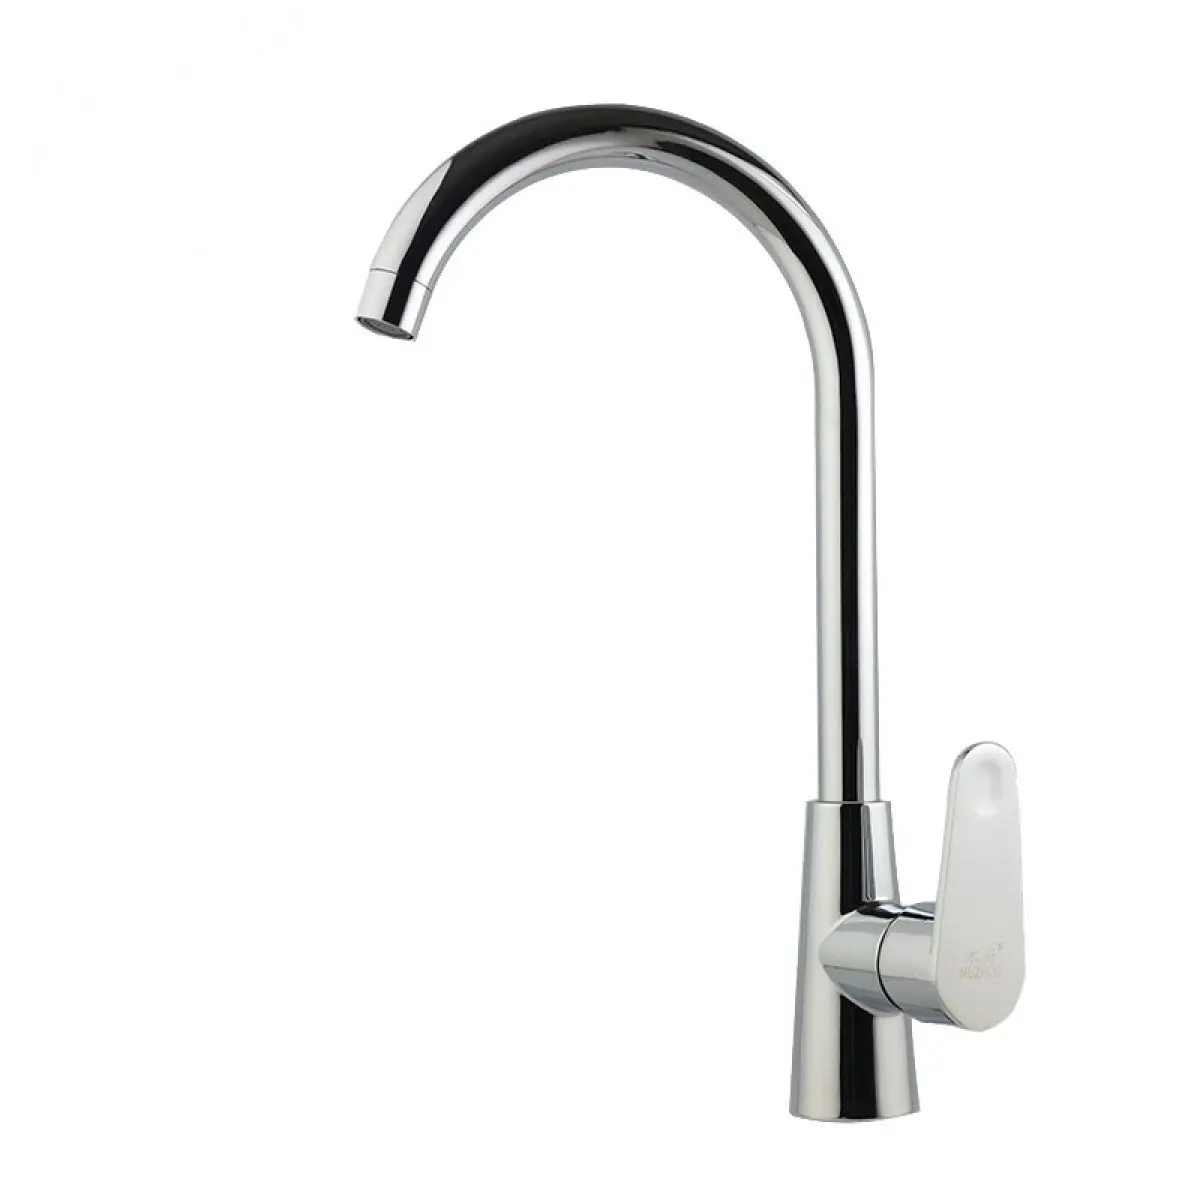 Cheap Wholesale Sinks And Faucets Find Wholesale Sinks And